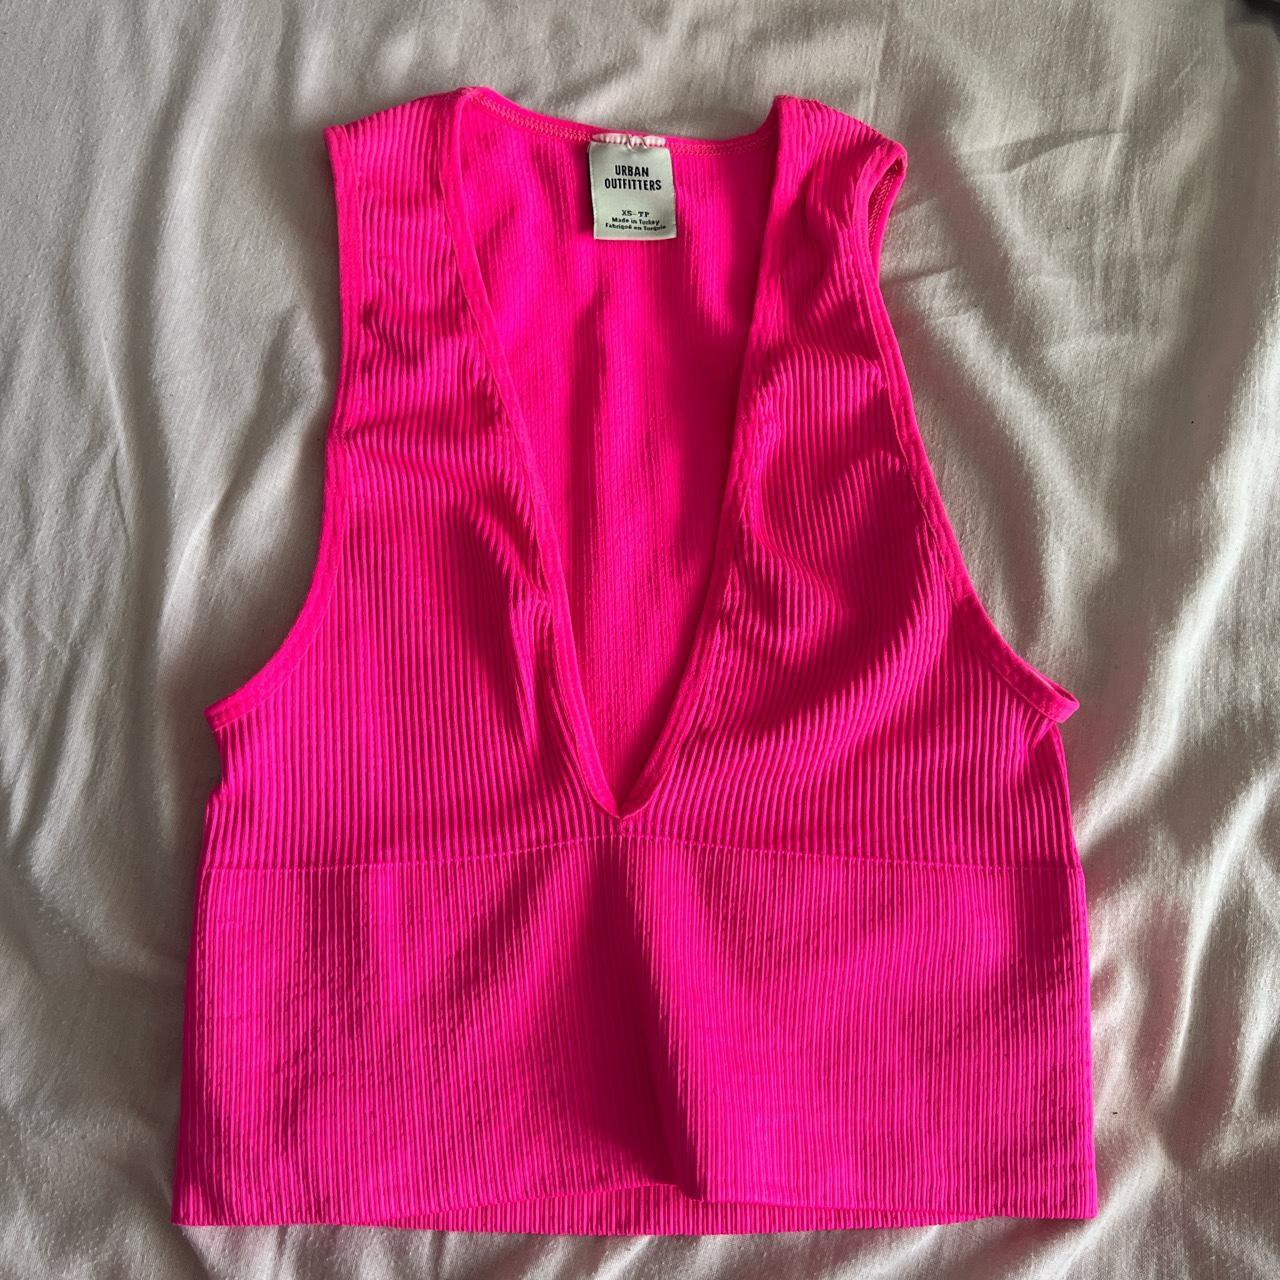 Urban outfitters neon pink v neck crop top So... - Depop